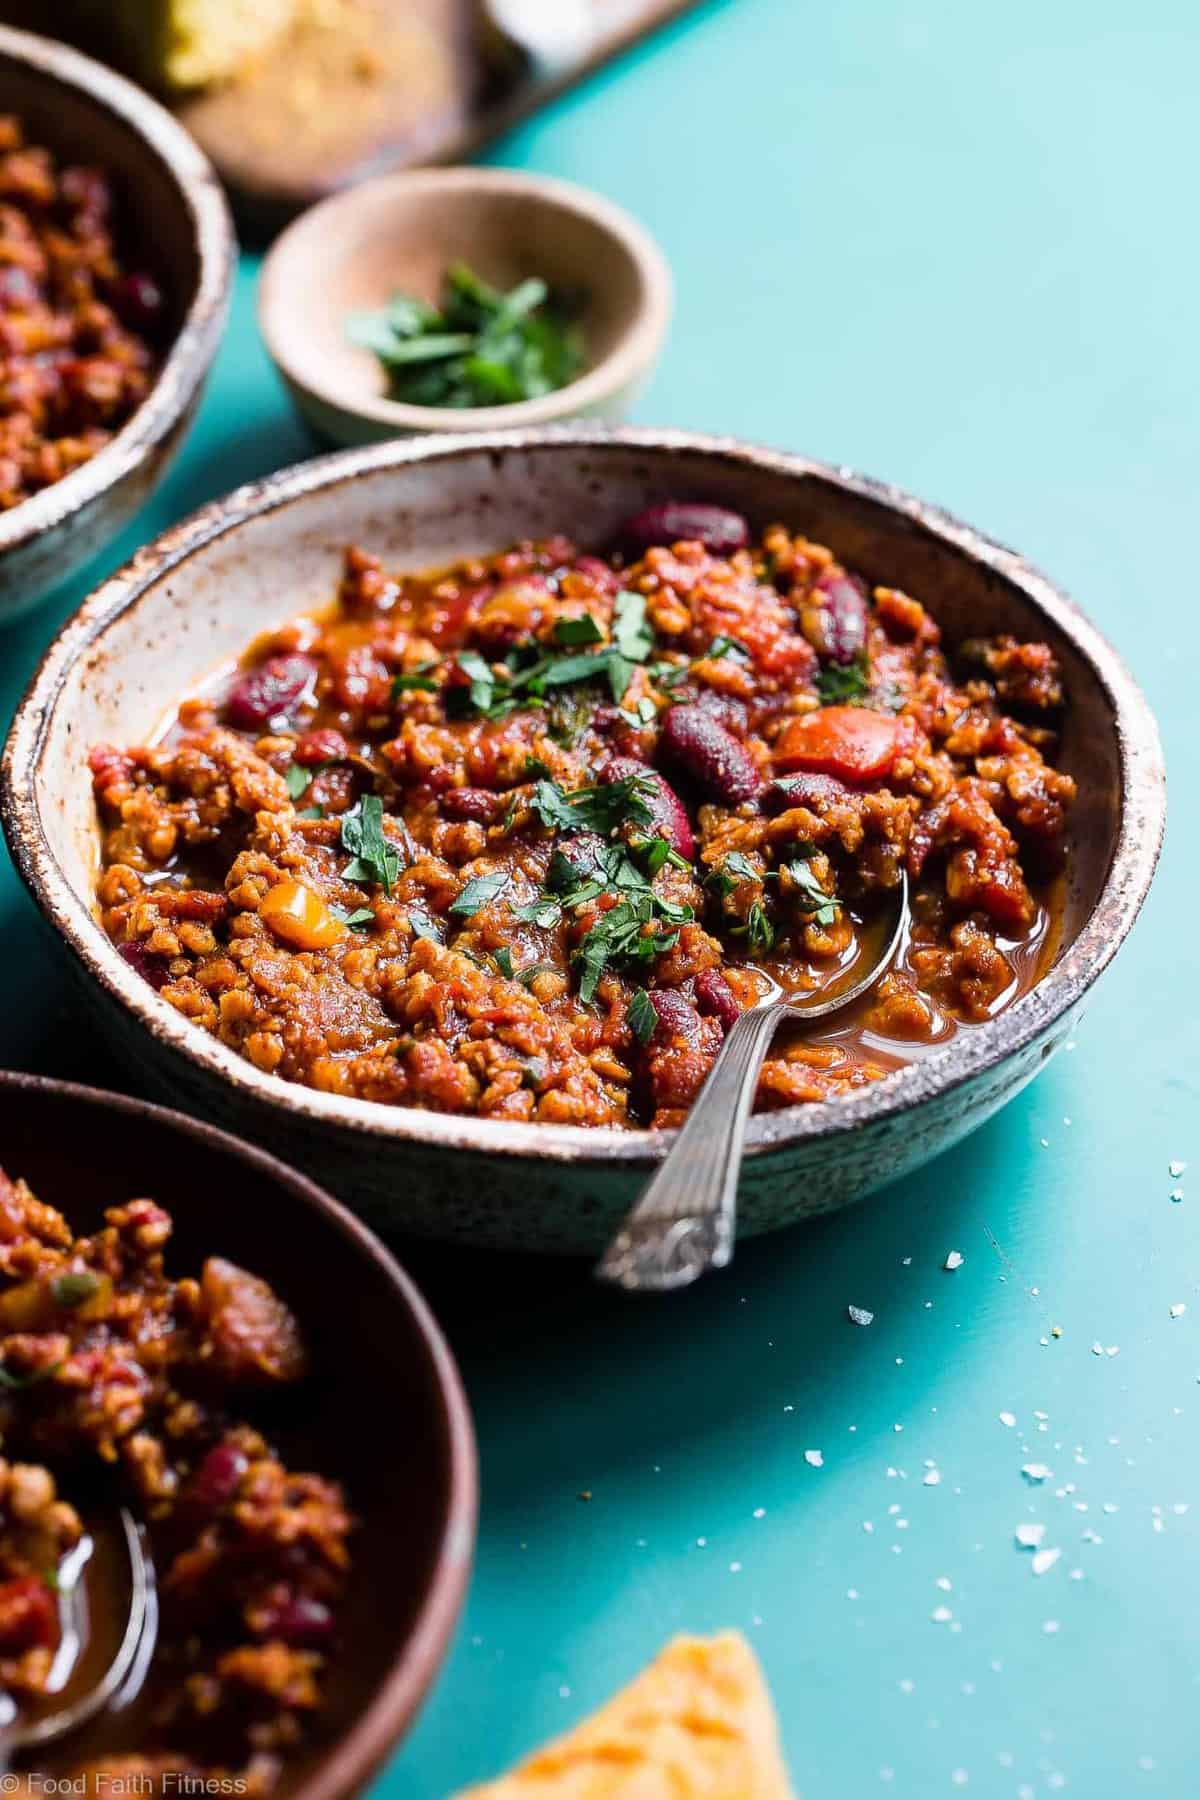 Instant Pot Meatless Vegan Chili -  You will NEVER believe that this is a vegetarian chili recipe! It's a healthy, gluten free weeknight meal that is ready in only 30 minutes! Even meat-eaters are going to LOVE this recipe! | #Foodfaithfitness | #Vegan #Vegetarian #Chili #Instantpot #healthy